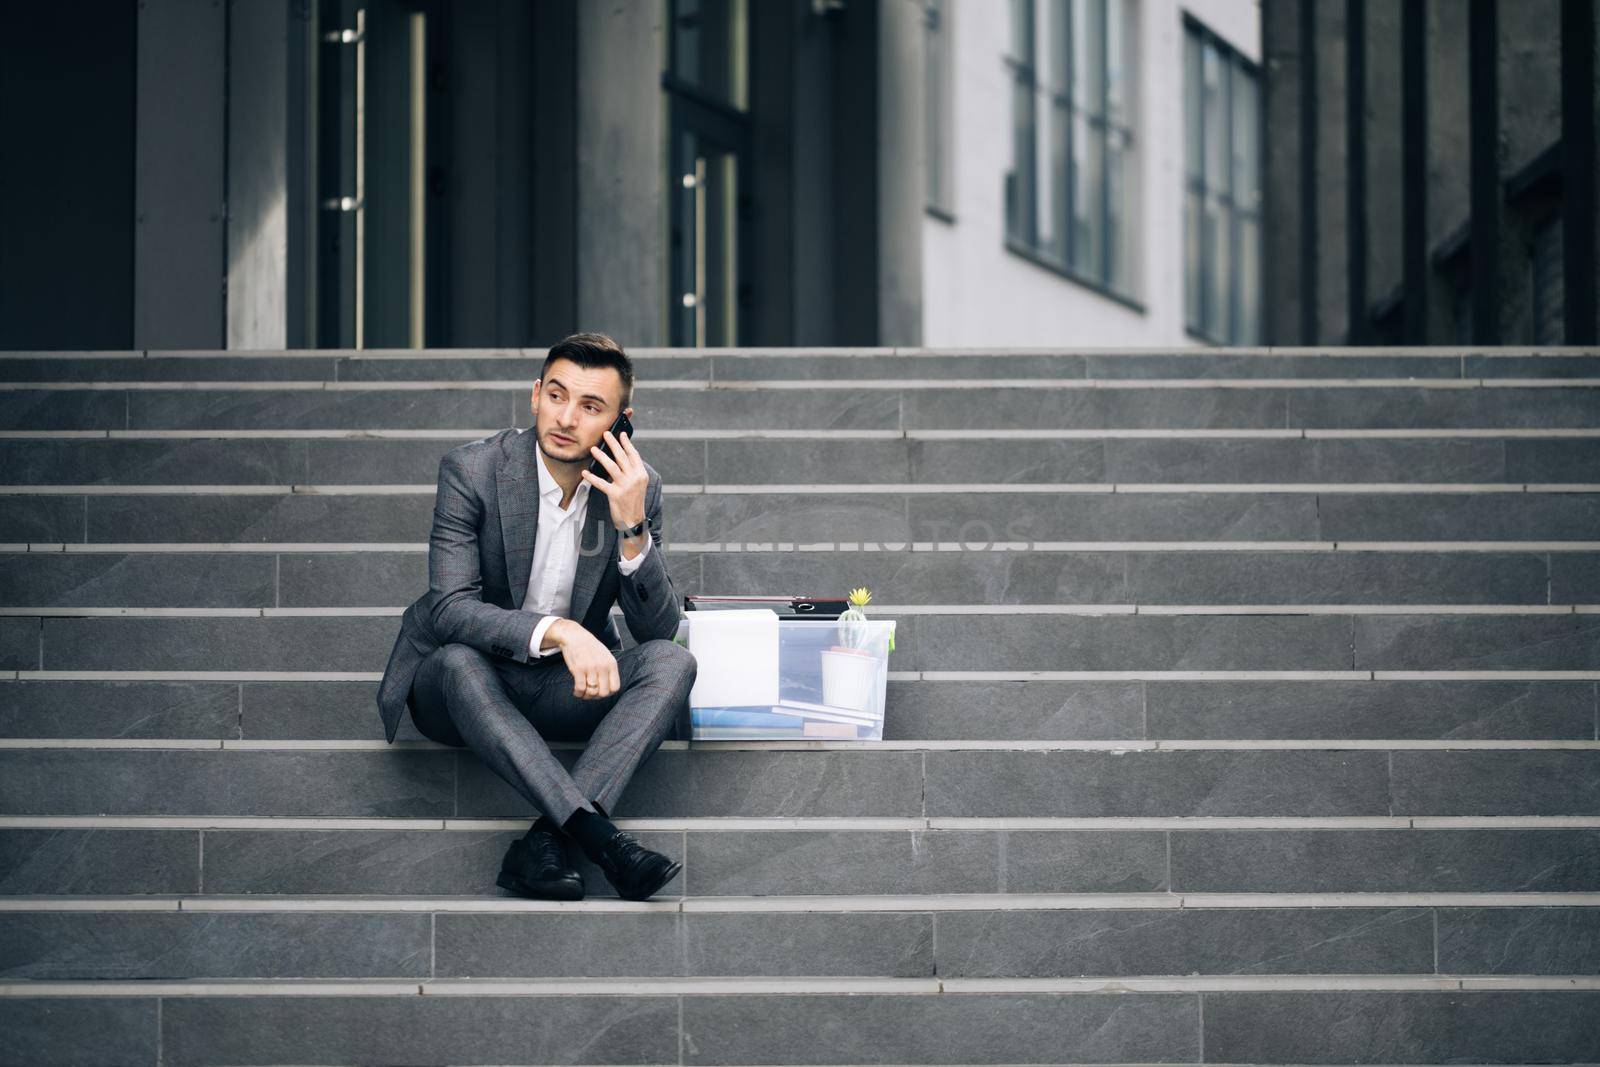 Young male jobless office worker in suit sitting on stairs outdoors. Fired man talking on phone with stuff in box. Cellphone conversation. Speaking on telephone.